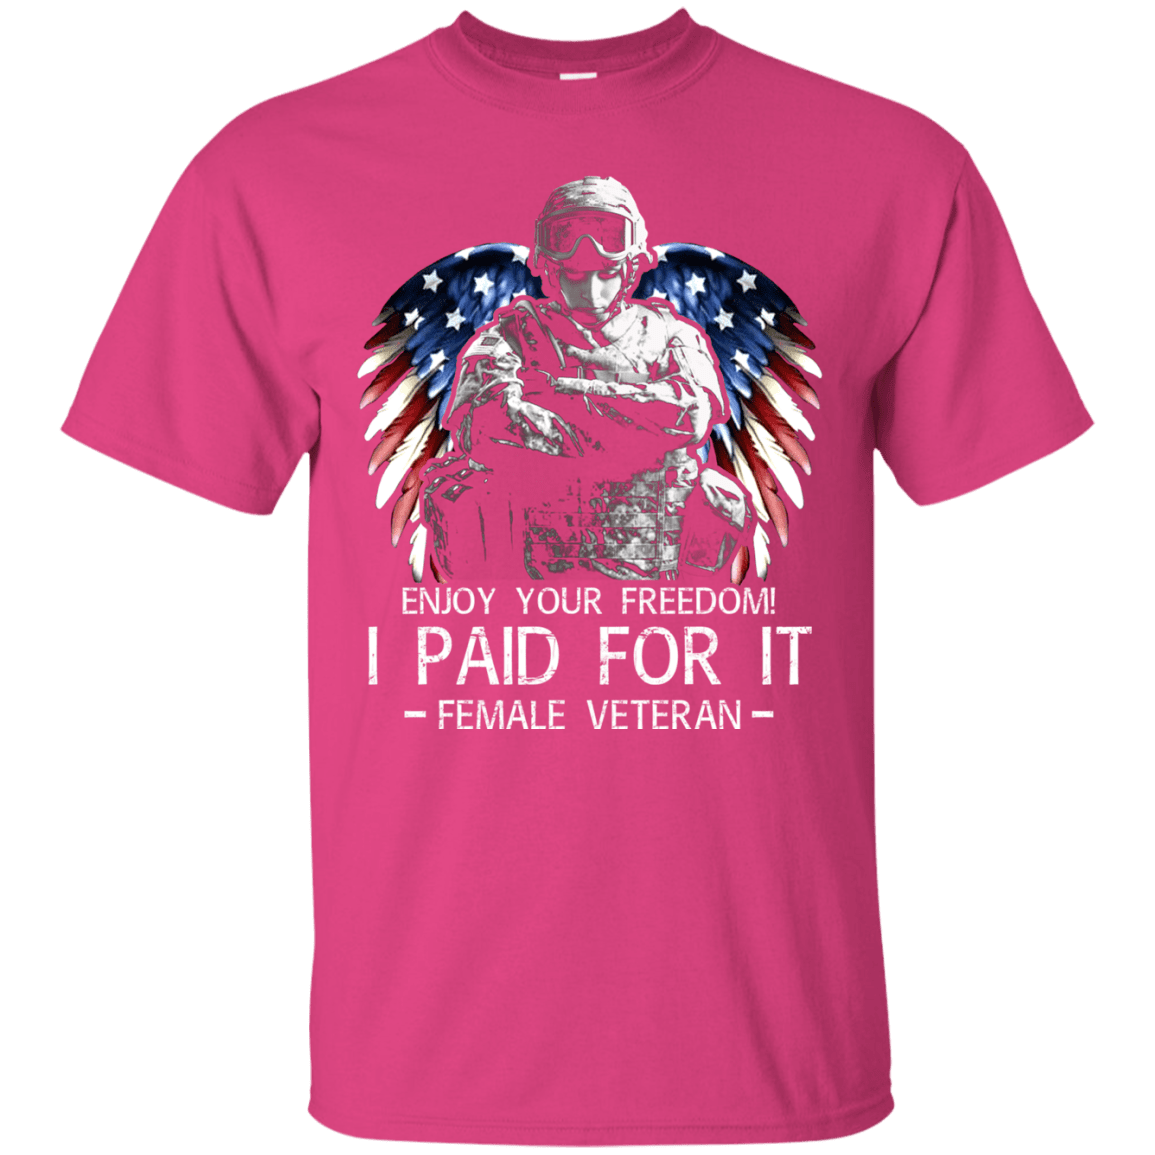 Military T-Shirt "Female Veteran - Enjoy your freedom I paid for it Women" Front-TShirt-General-Veterans Nation